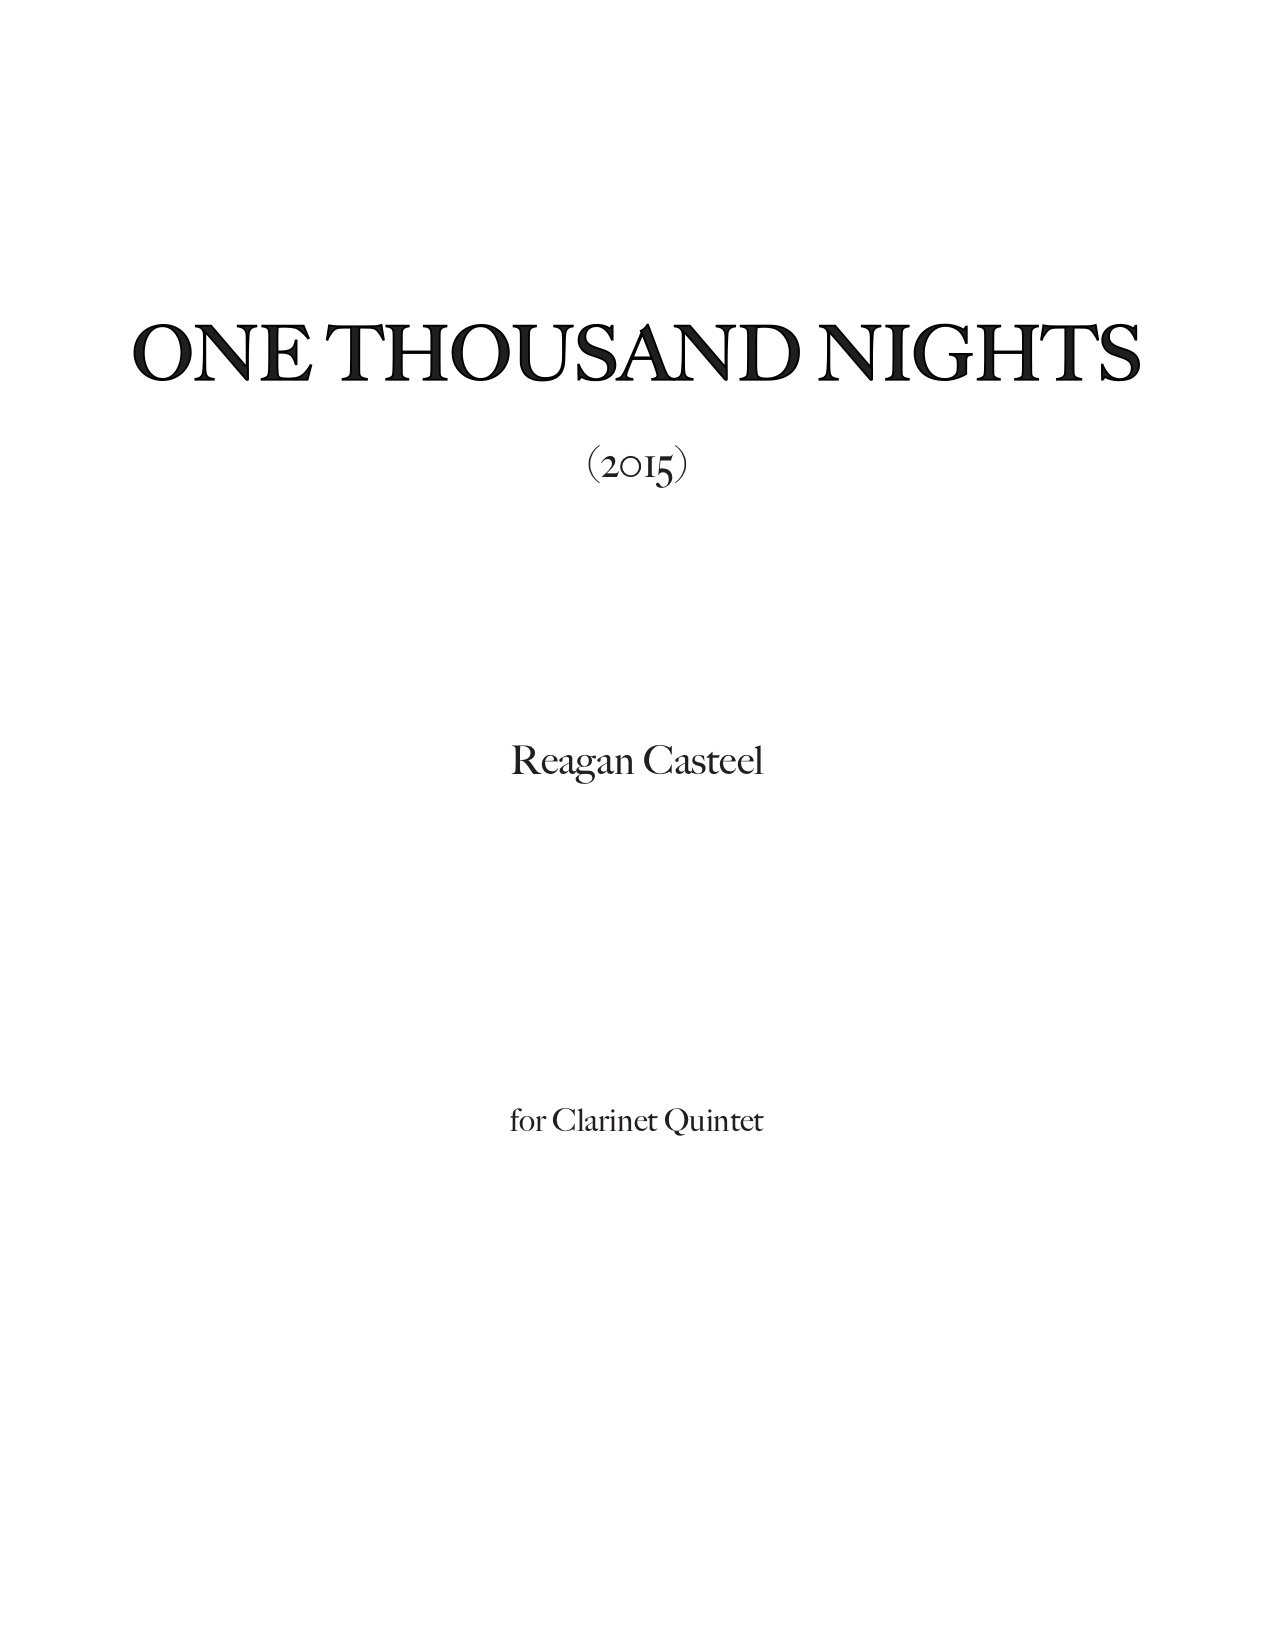 One Thousand Nights Full Score and Parts copy (dragged).jpg